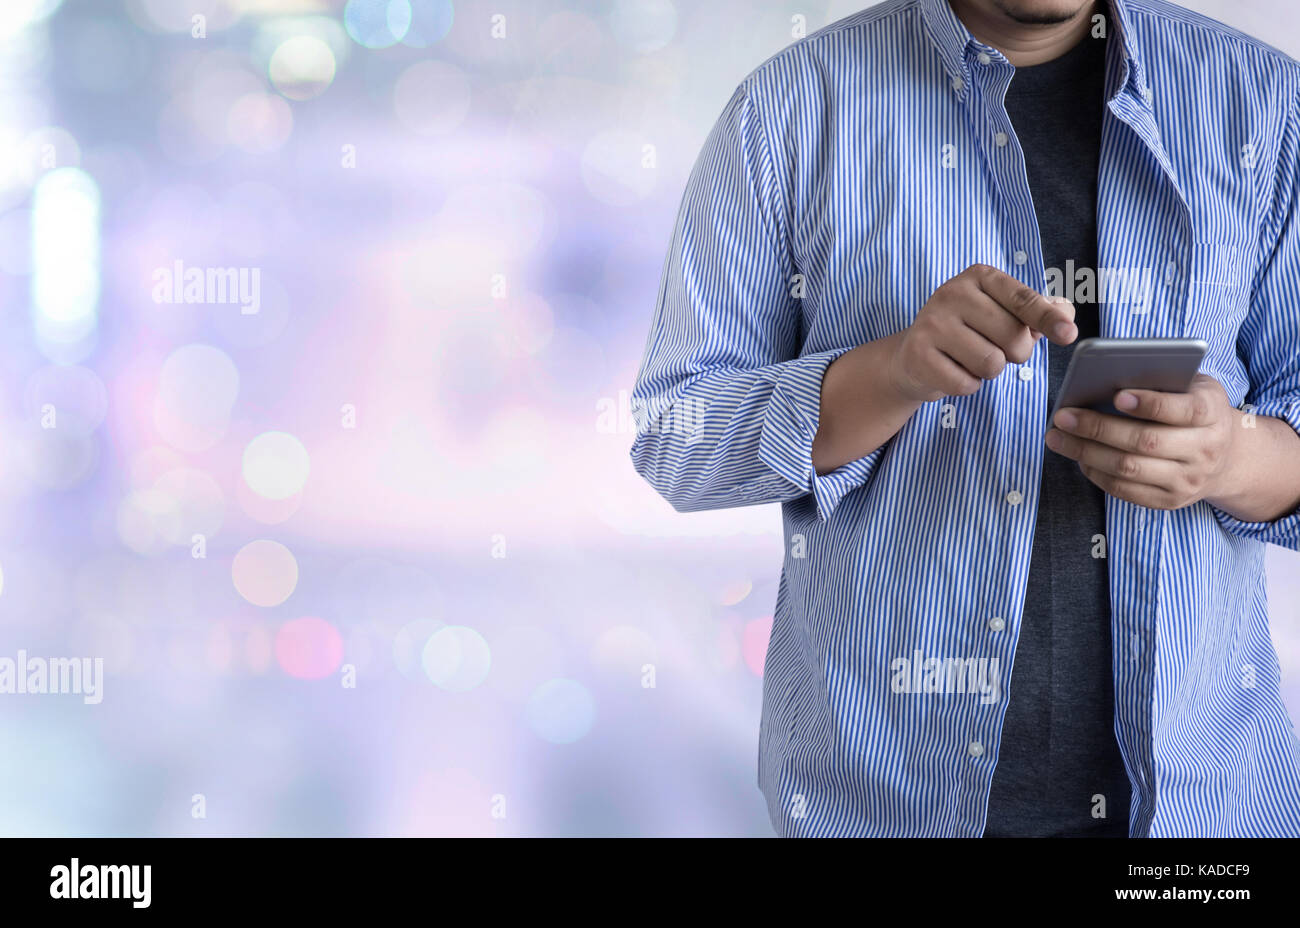 person holding a smartphone on blurred cityscape background Stock Photo